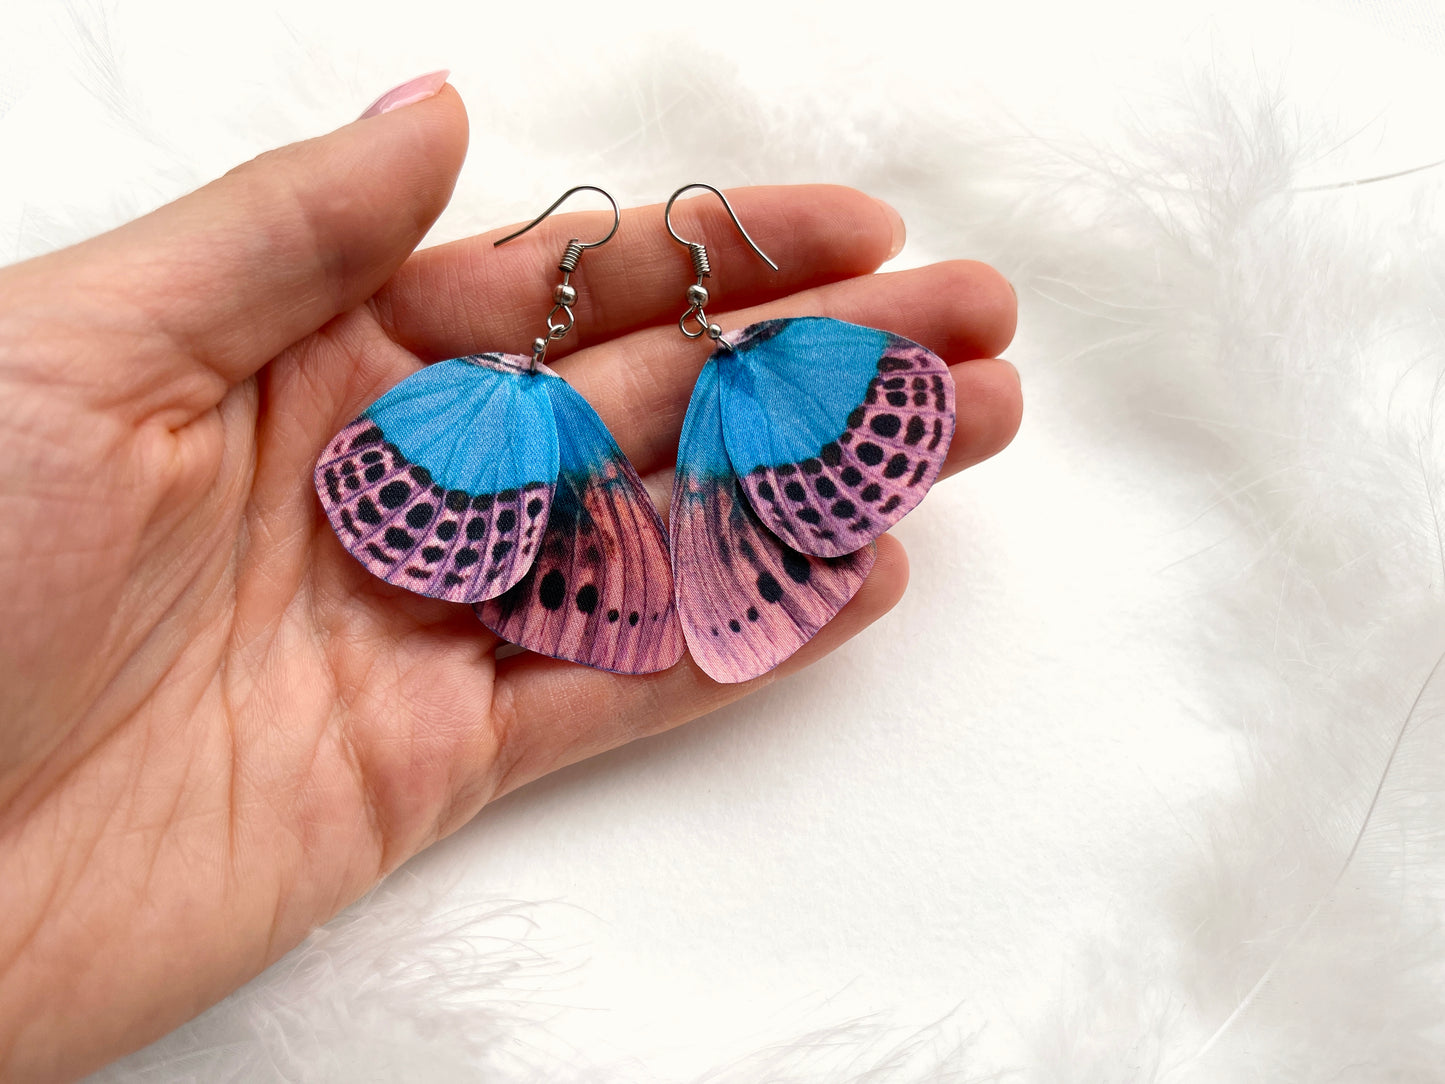 Butterfly earrings in boho style hand made of silk lightweight and big in the same time, perfect gift for anyone who loves butterflies and moths, earrings in boho chic style with silk butterfly wings eco friendly and sustainable hand made of silk